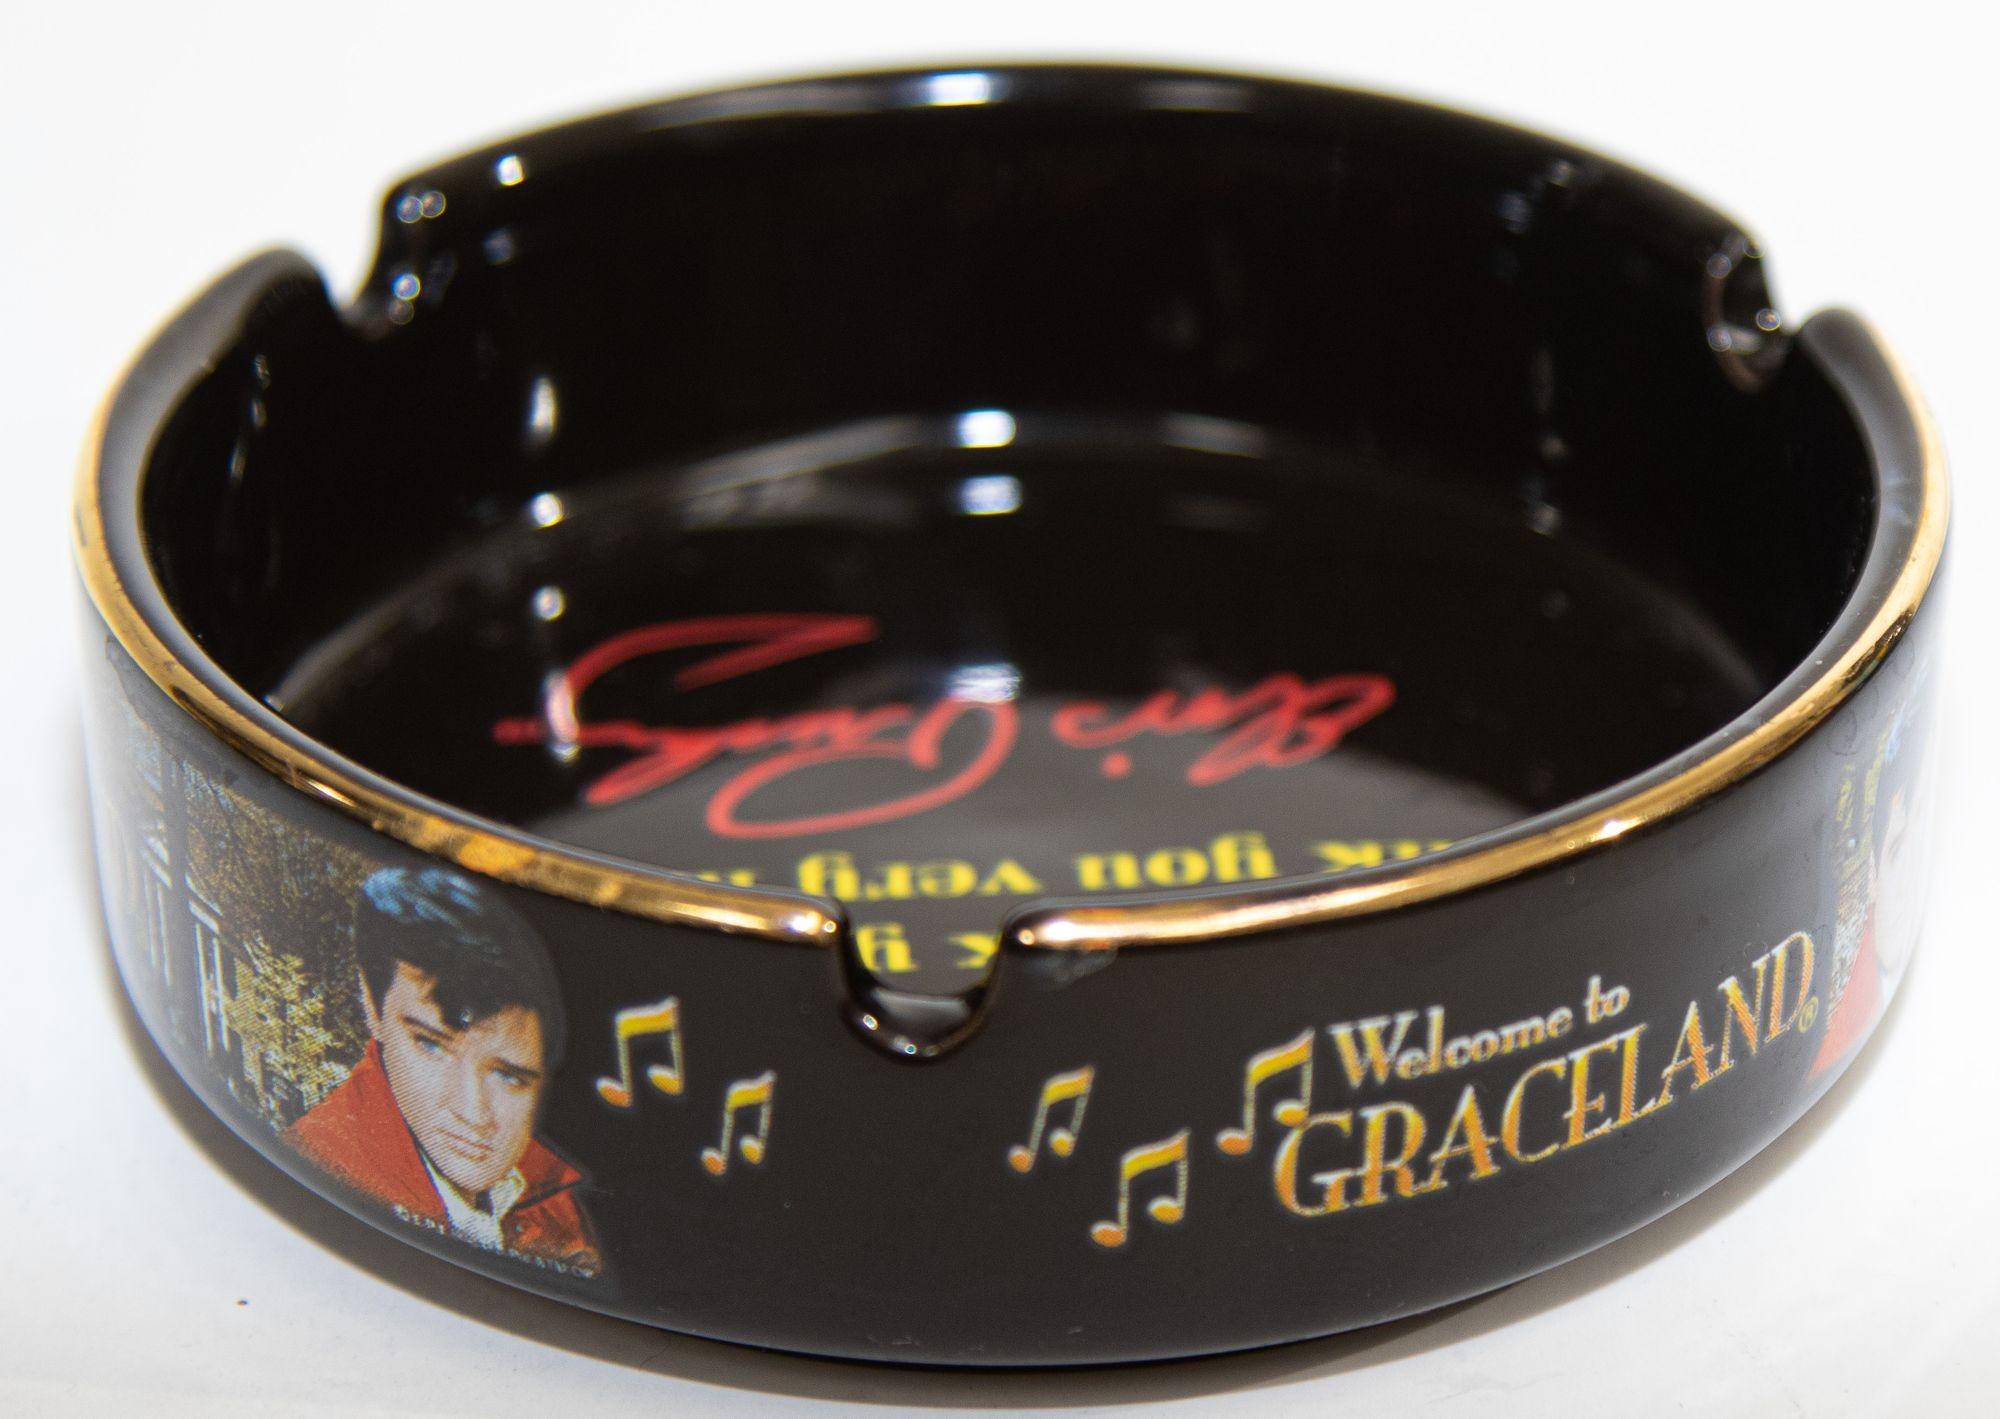 Vintage Elvis Presley Graceland Black Porcelain Ashtray.
Collectible souvenir Elvis Presley Graceland Ash Tray gold trim.
Excellent preowned condition.
From Elvis Presley Memphis, Graceland Museum.
Inscribed as below in yellow and signed in red.
